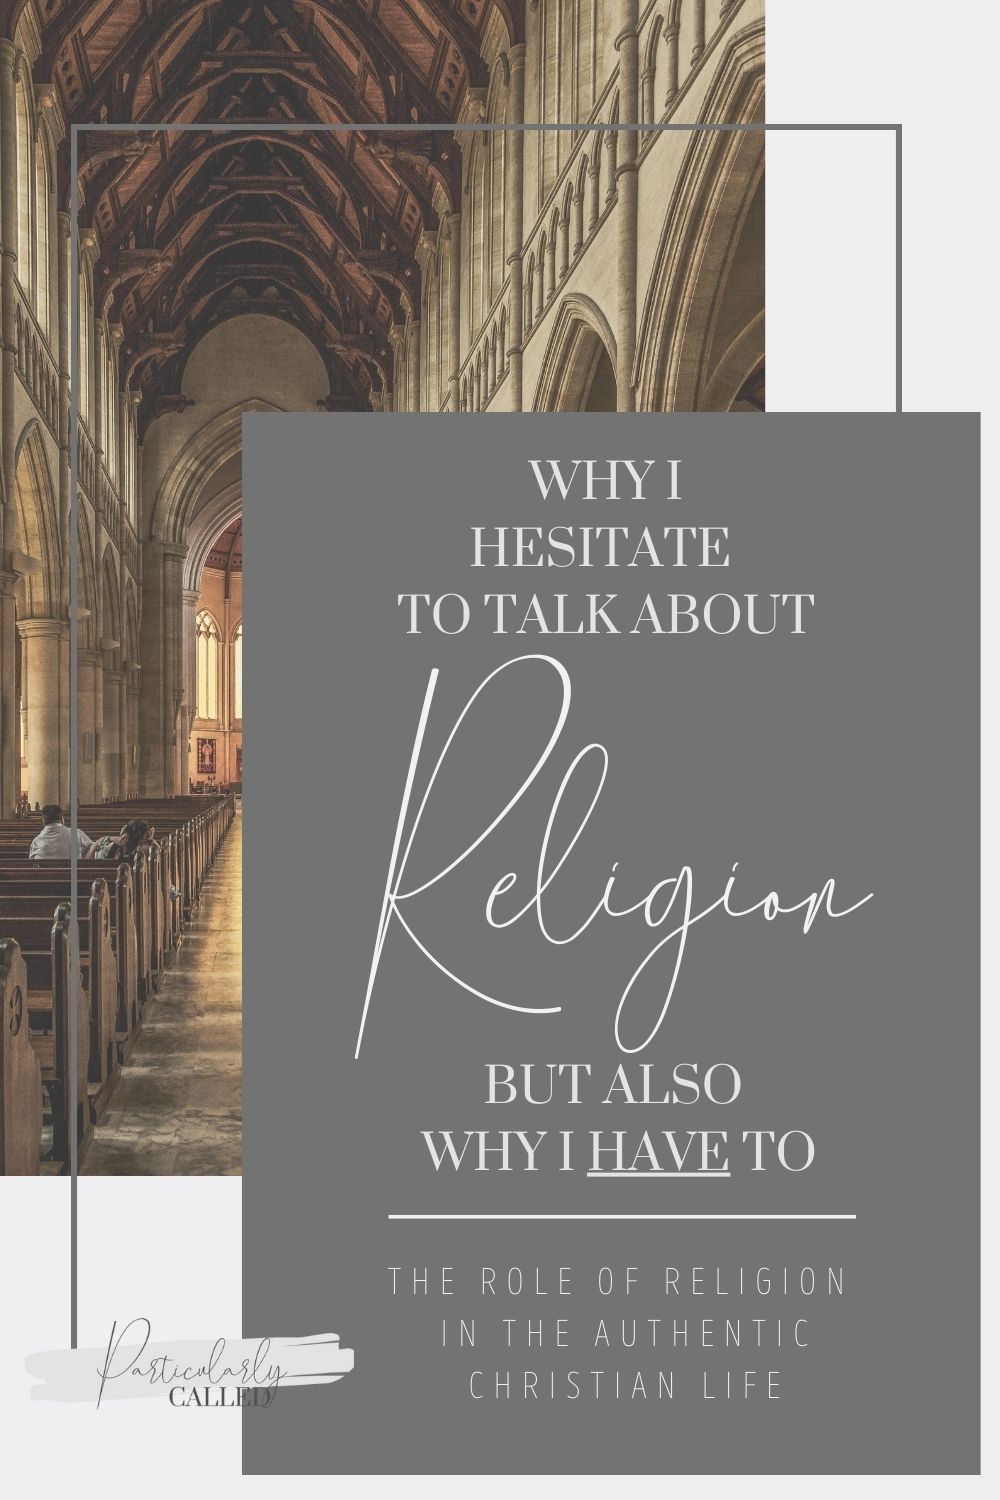 Why I hesitate to talk about Religion - Role of Religion in the Authentic Christian Life